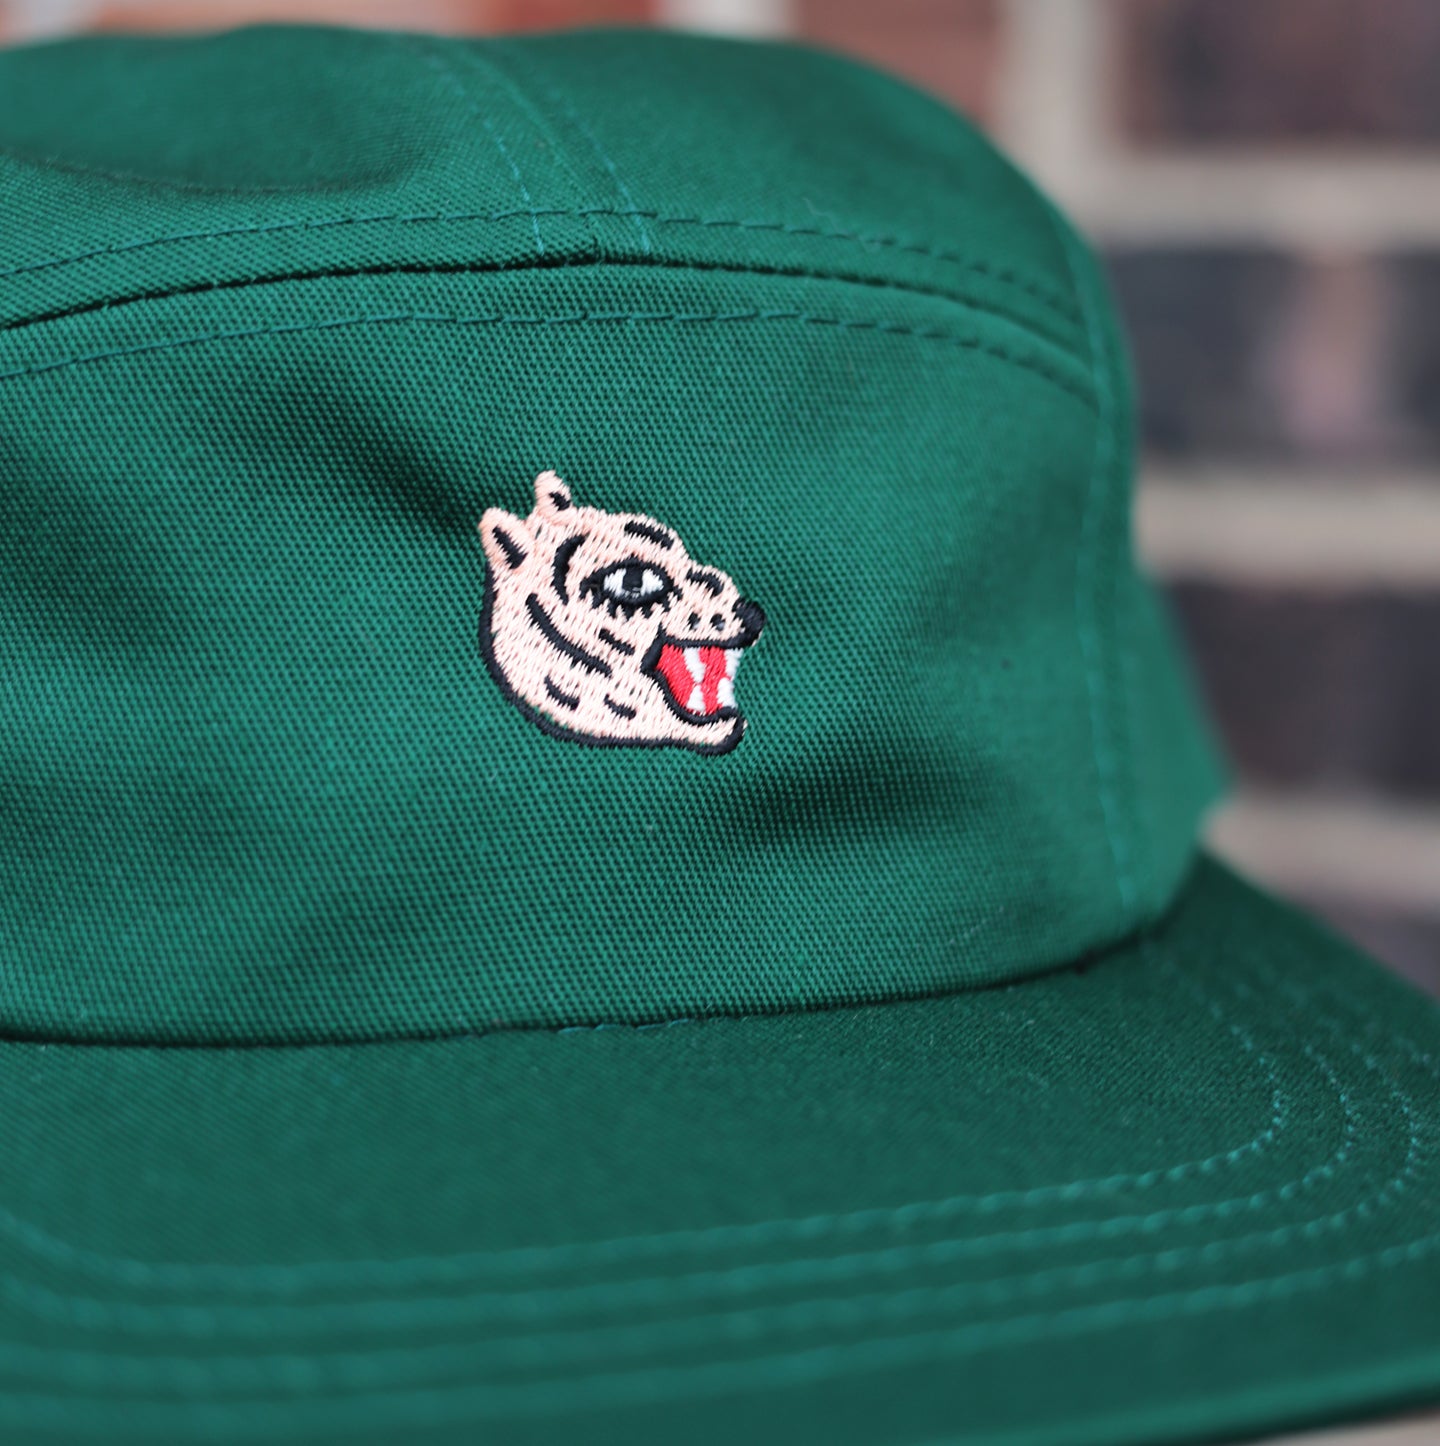 5 Panel - Forest - Wild Cat Embroidery